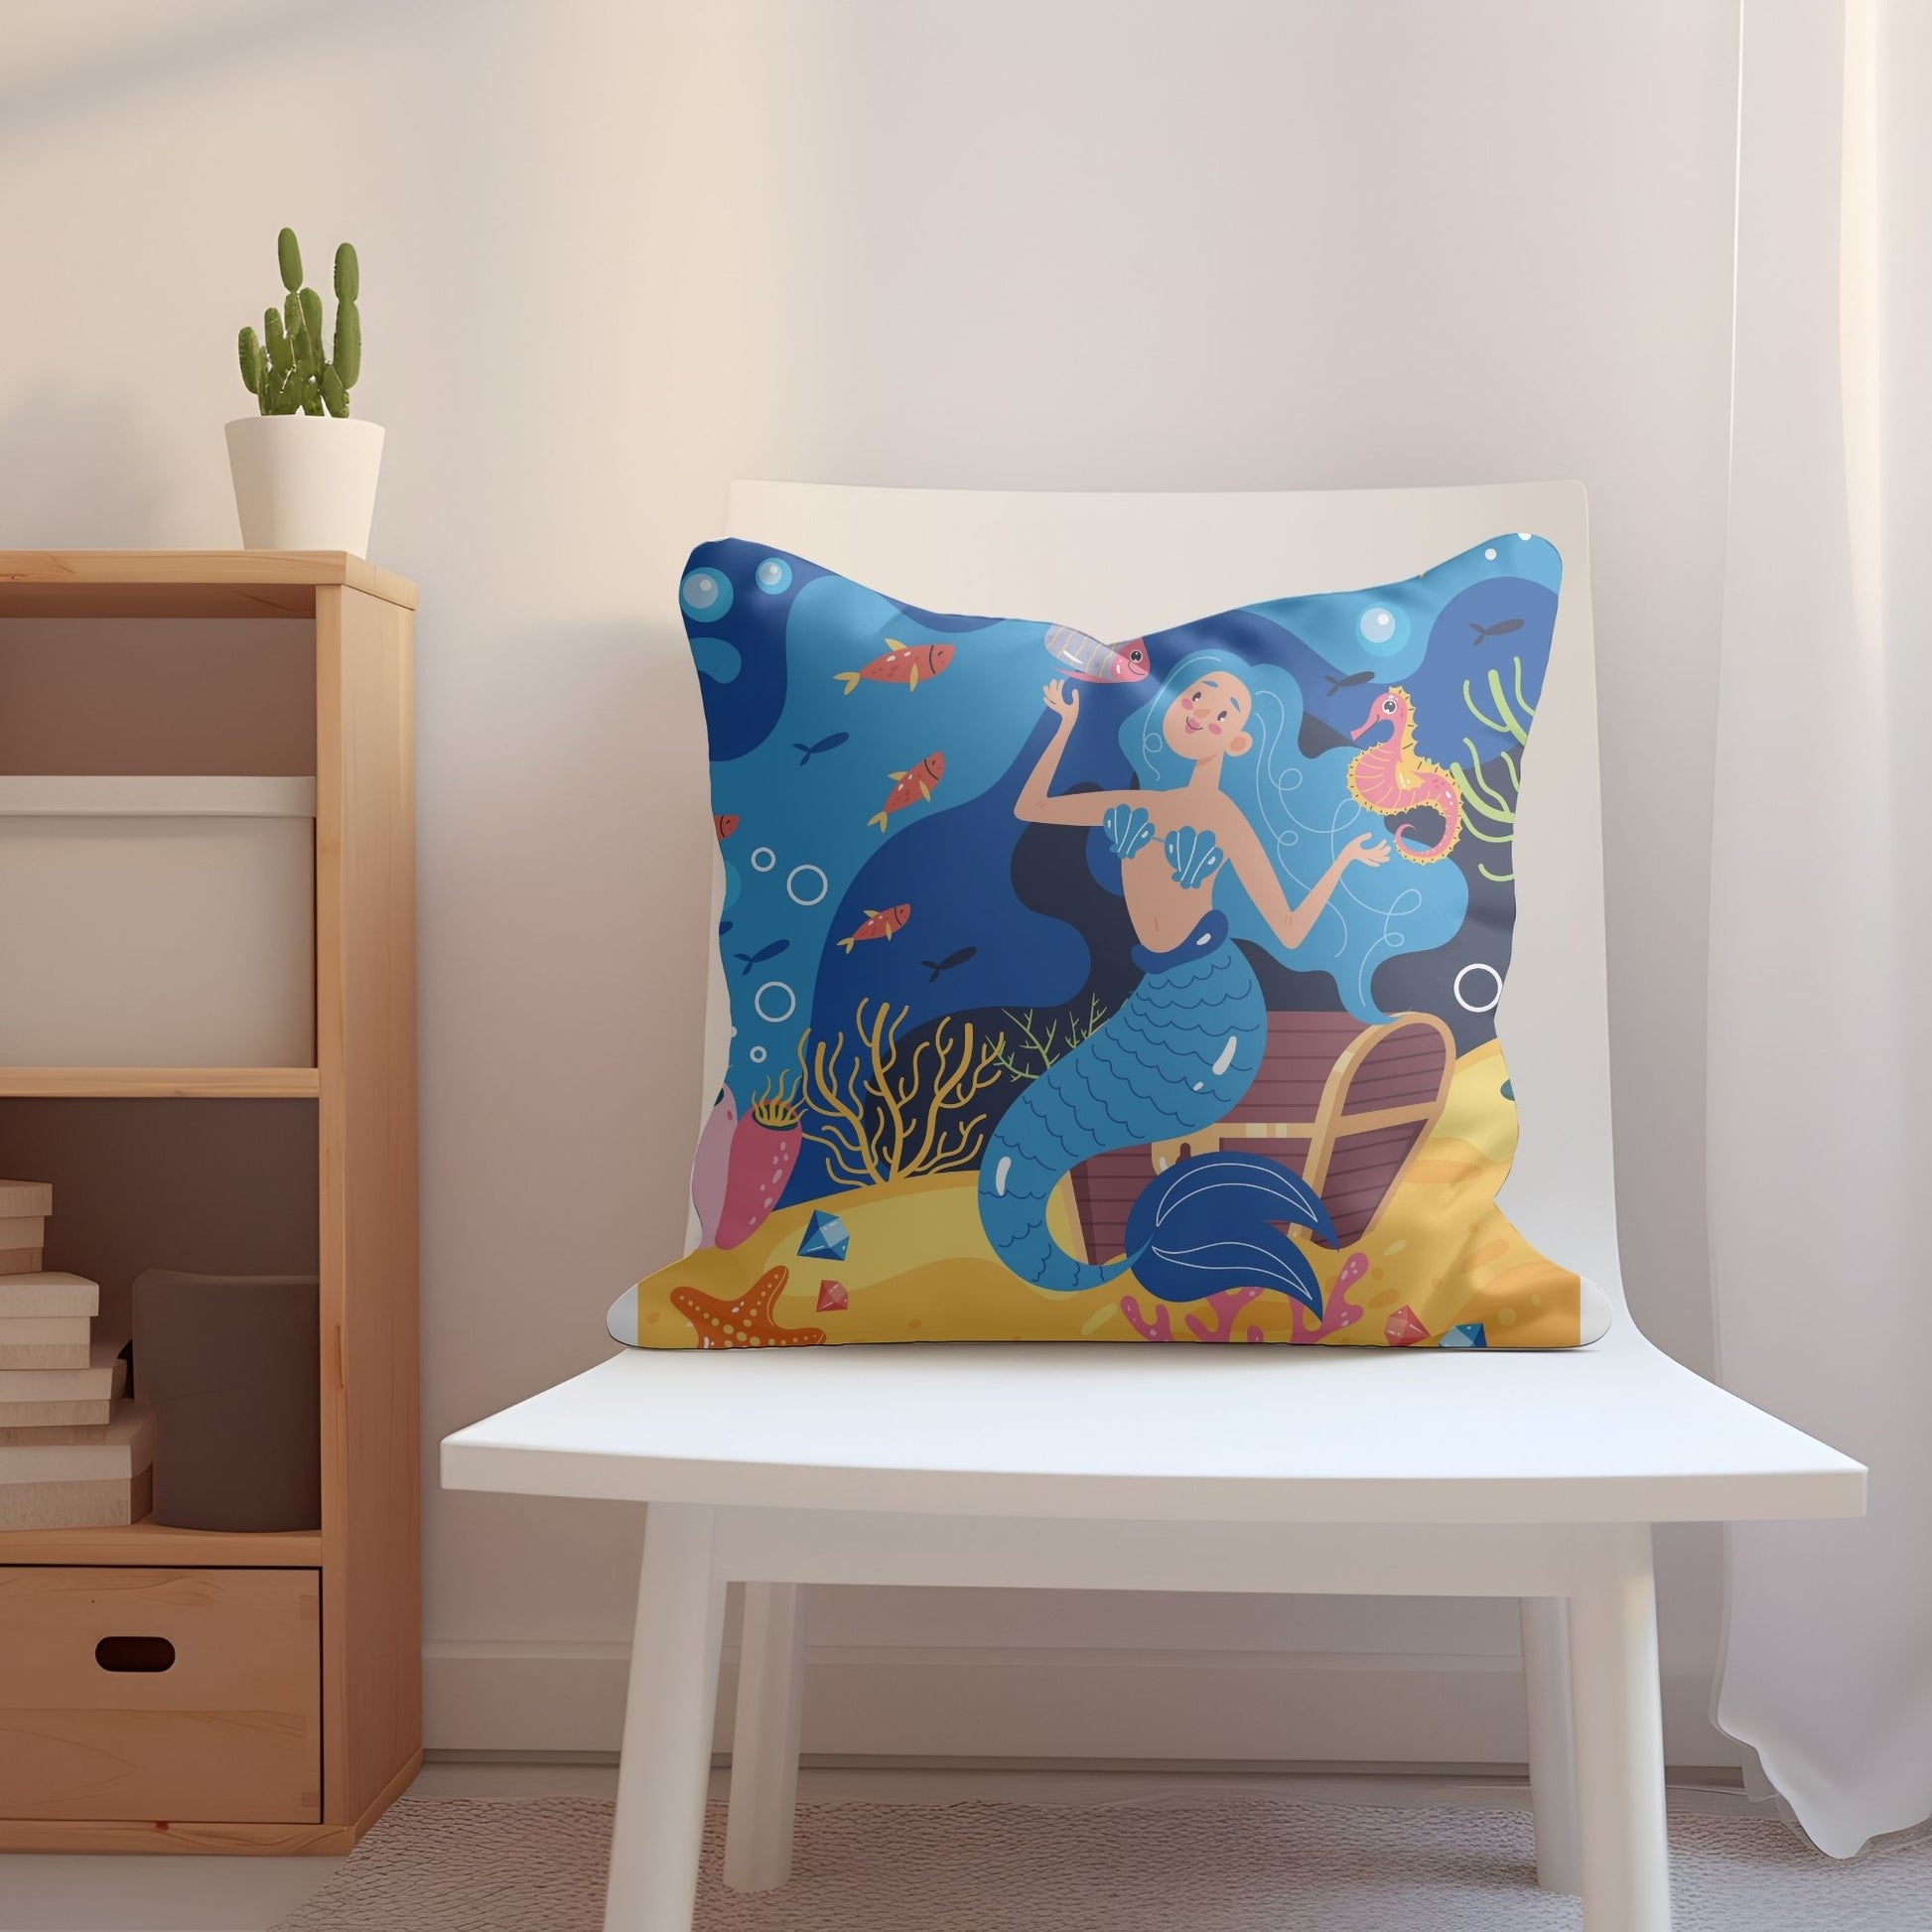 Adorable mermaid pattern pillow perfect for adding magic to girls' rooms.